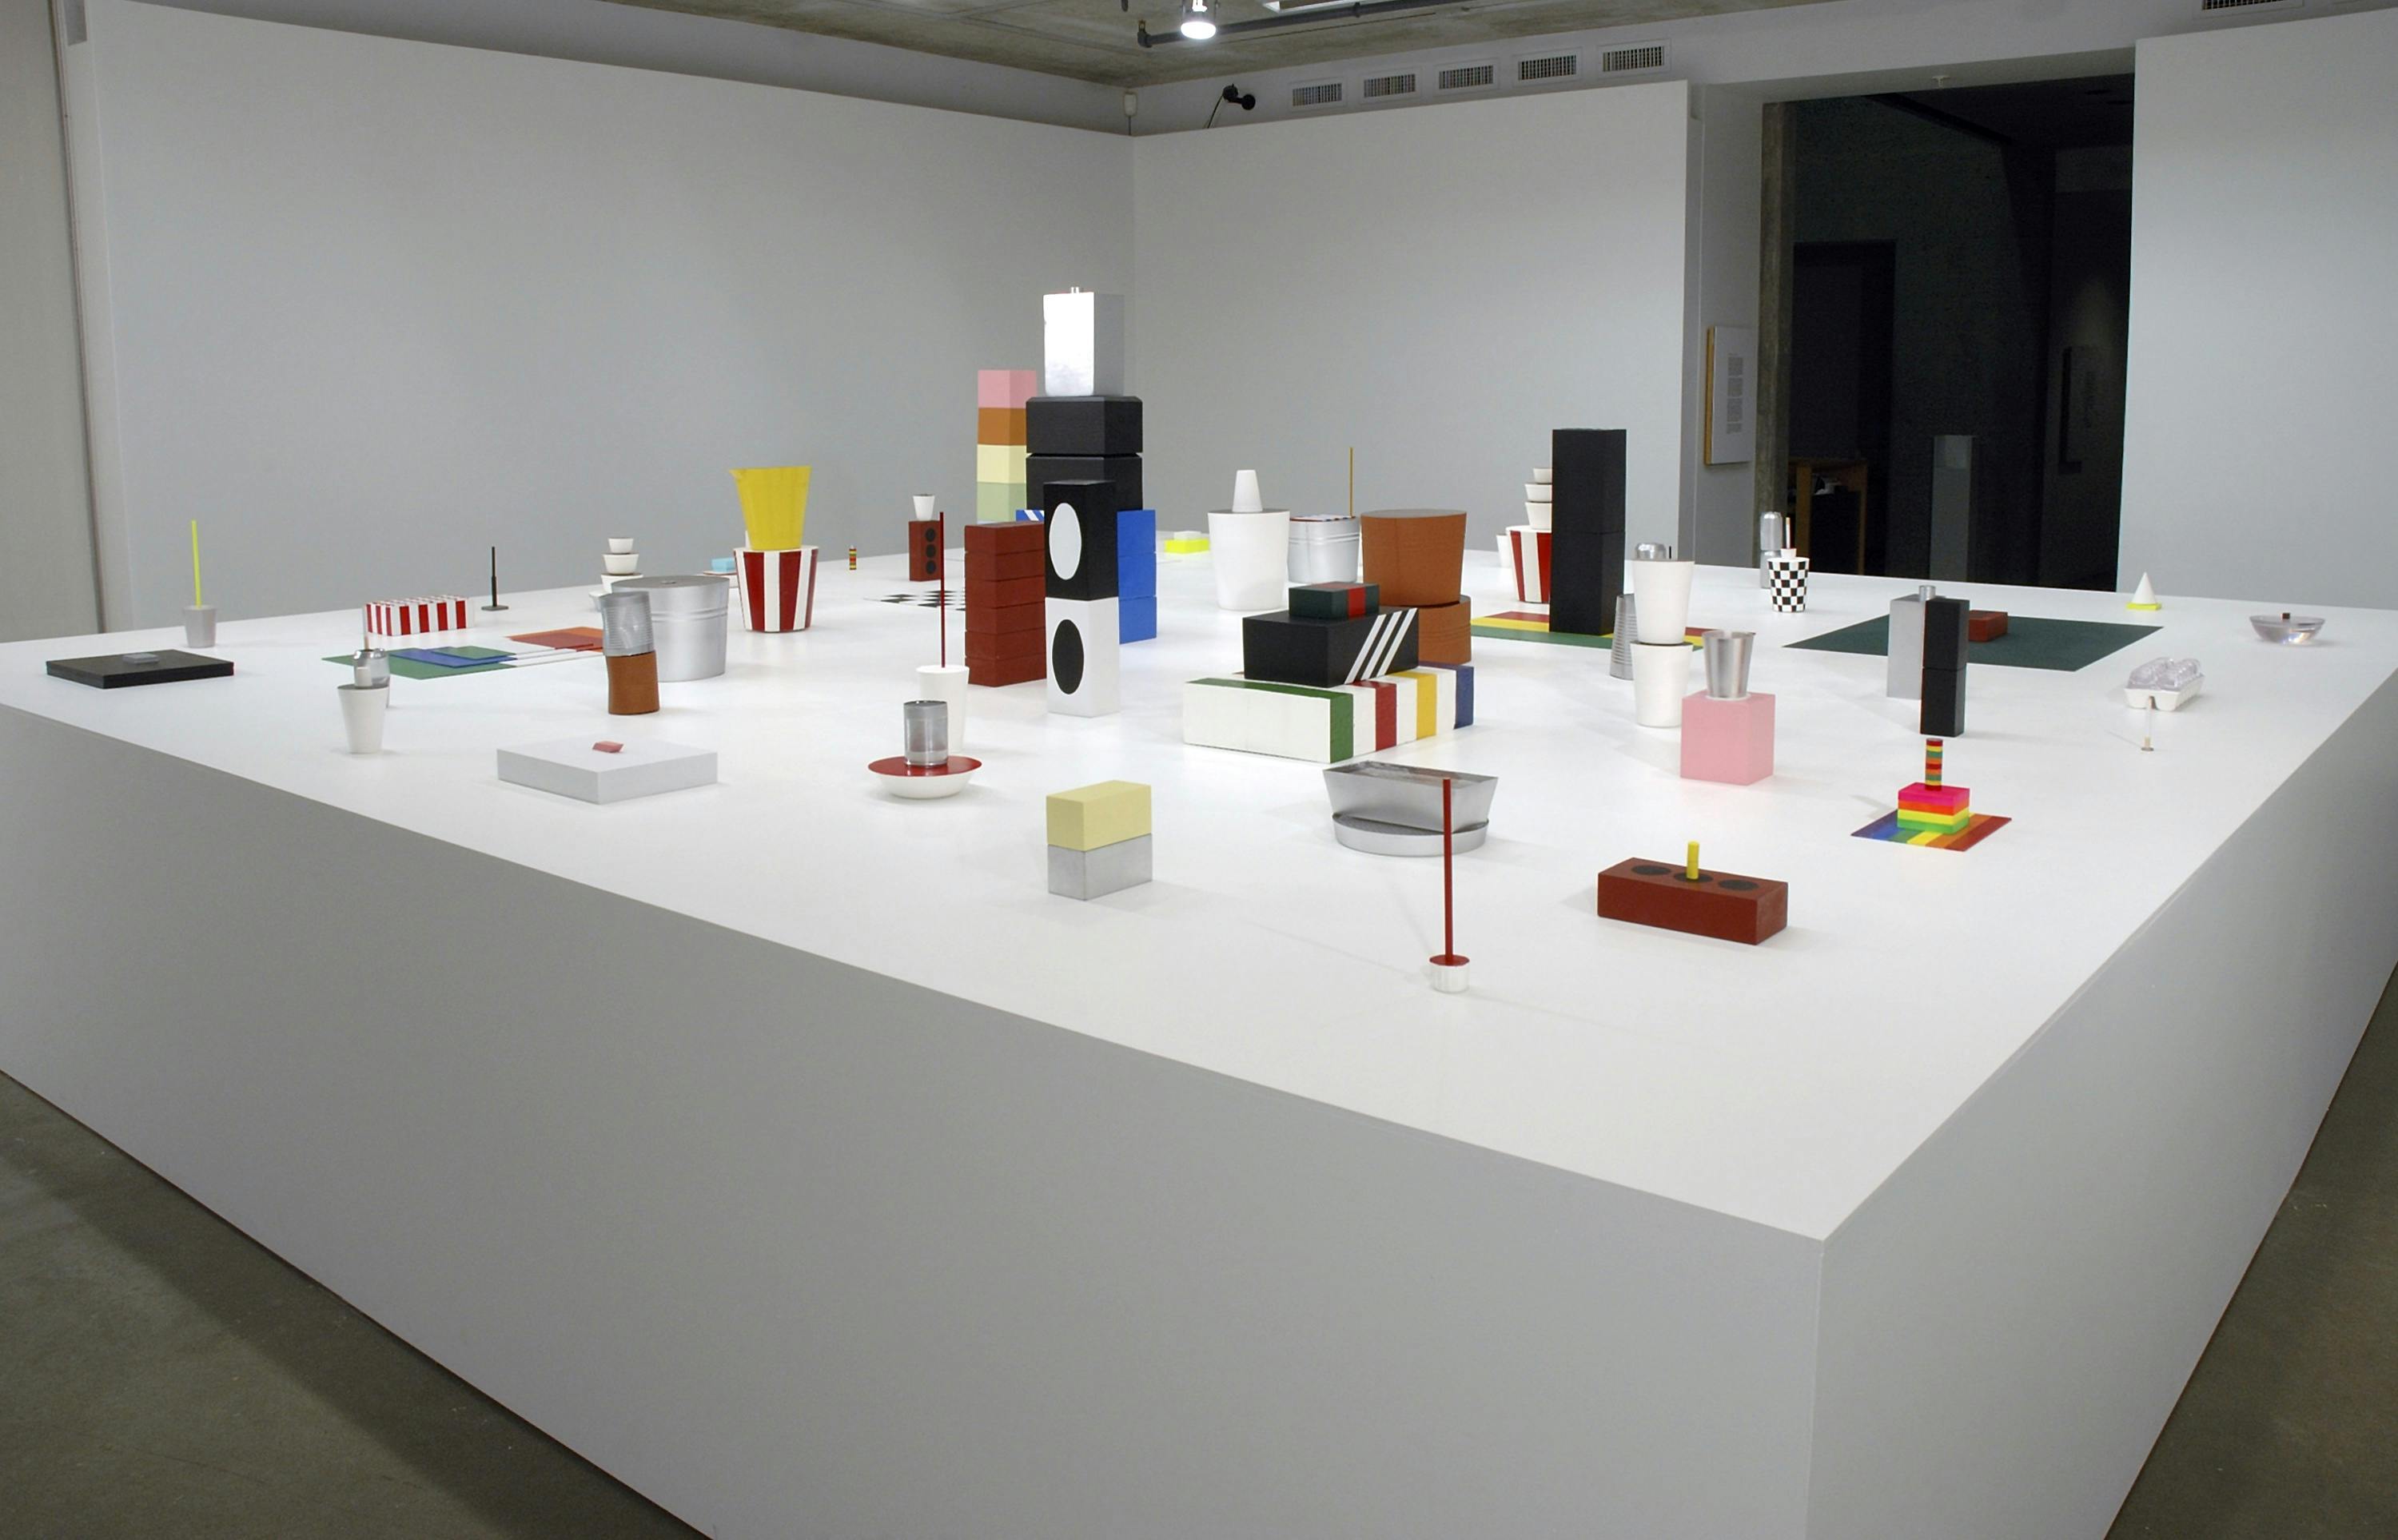 Install image of sculptures on a large low pedestal placed in a gallery. Sculptures vary in size, shape, and colour. They mimic commercial objects and icons such as a Kentucky Fried Chicken bucket and Hudson’s Bay stripes.